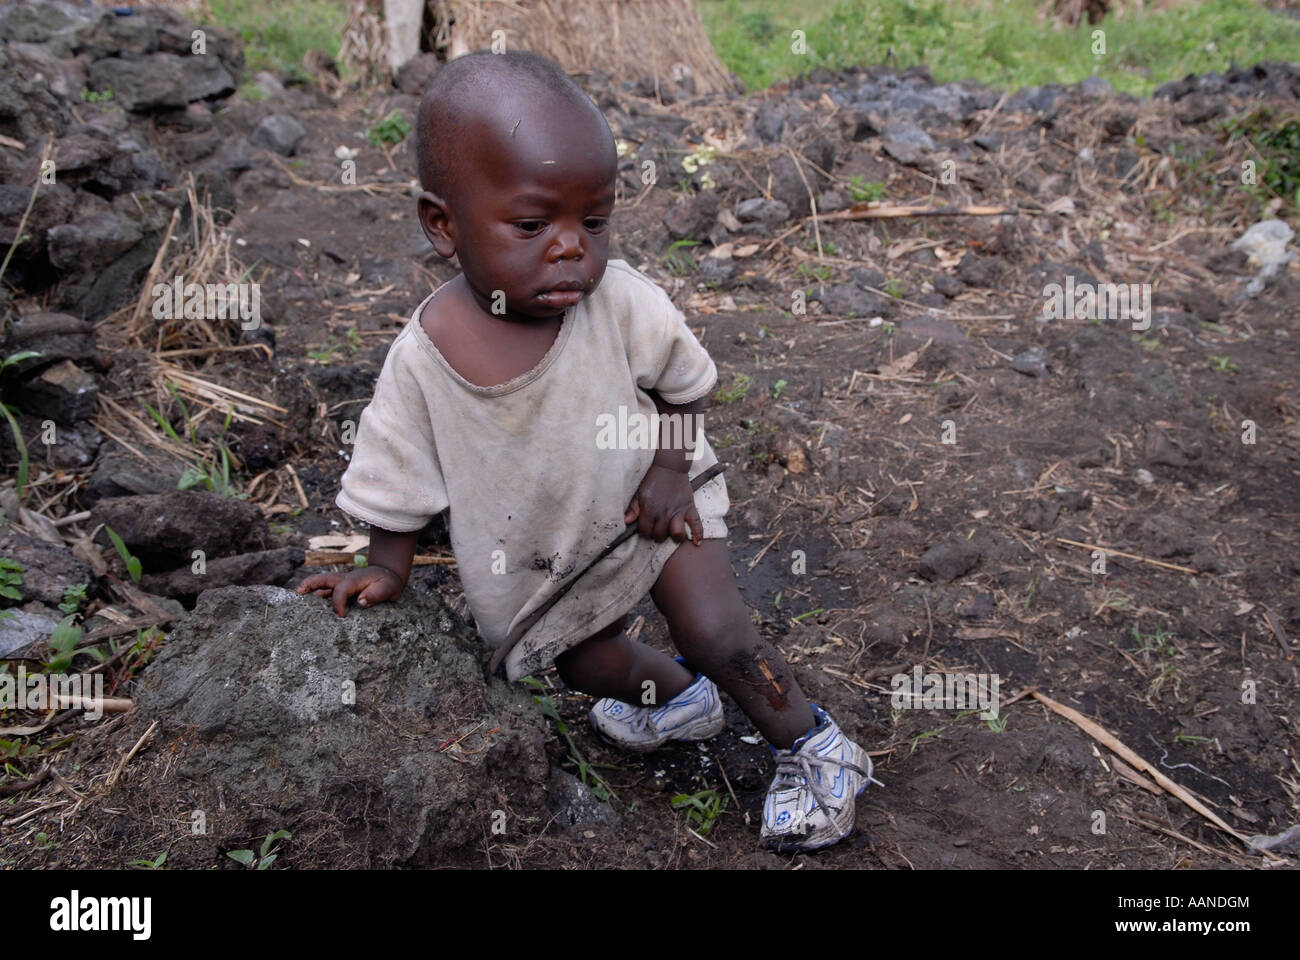 A young Congolese child in an IDP makeshift camp in North Kivu province DR Congo Africa Stock Photo